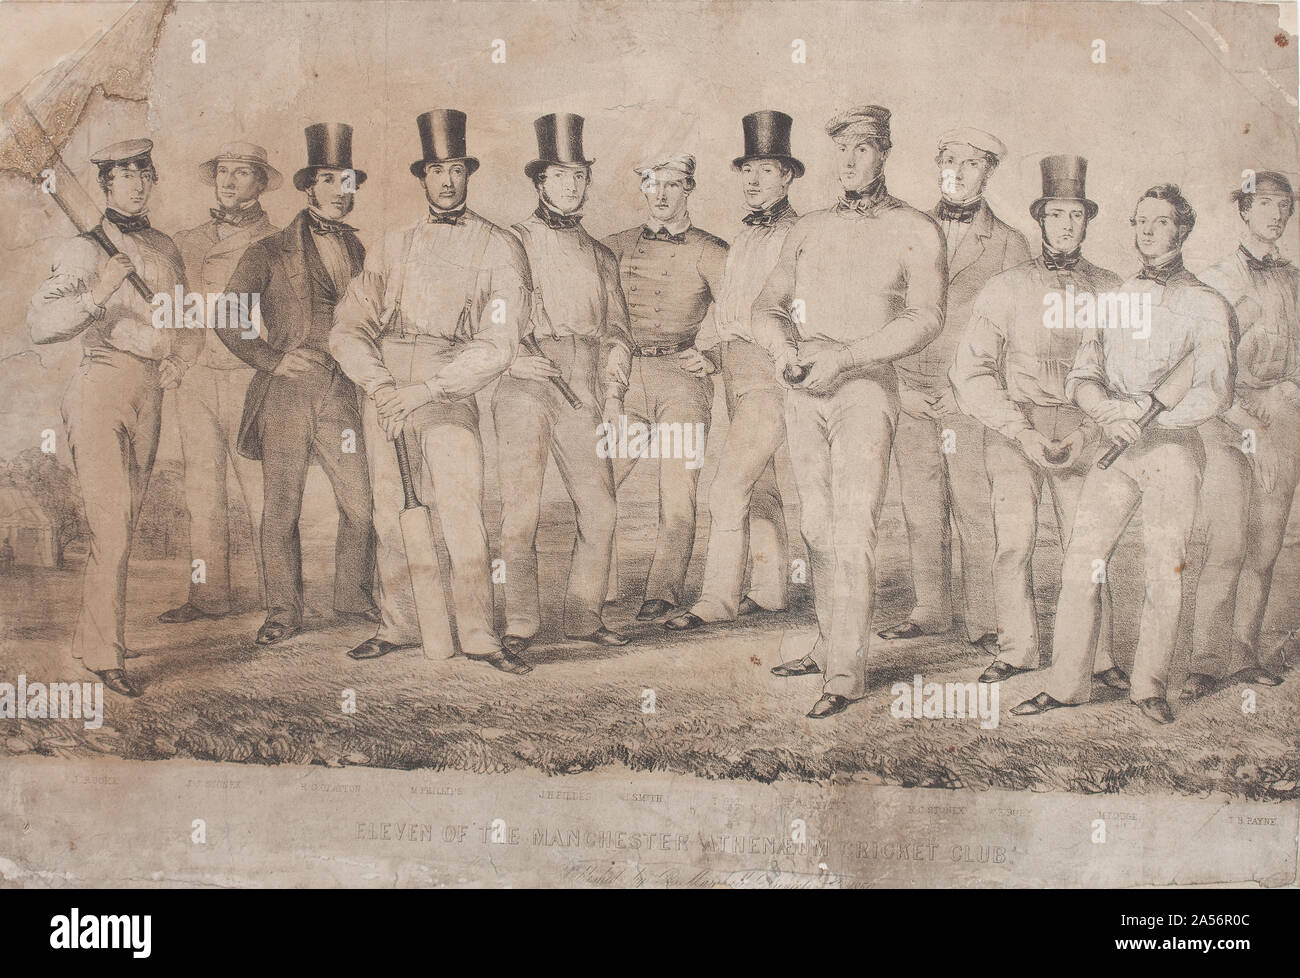 Eleven of the Manchester athenaeum cricket club. 1850 Stock Photo